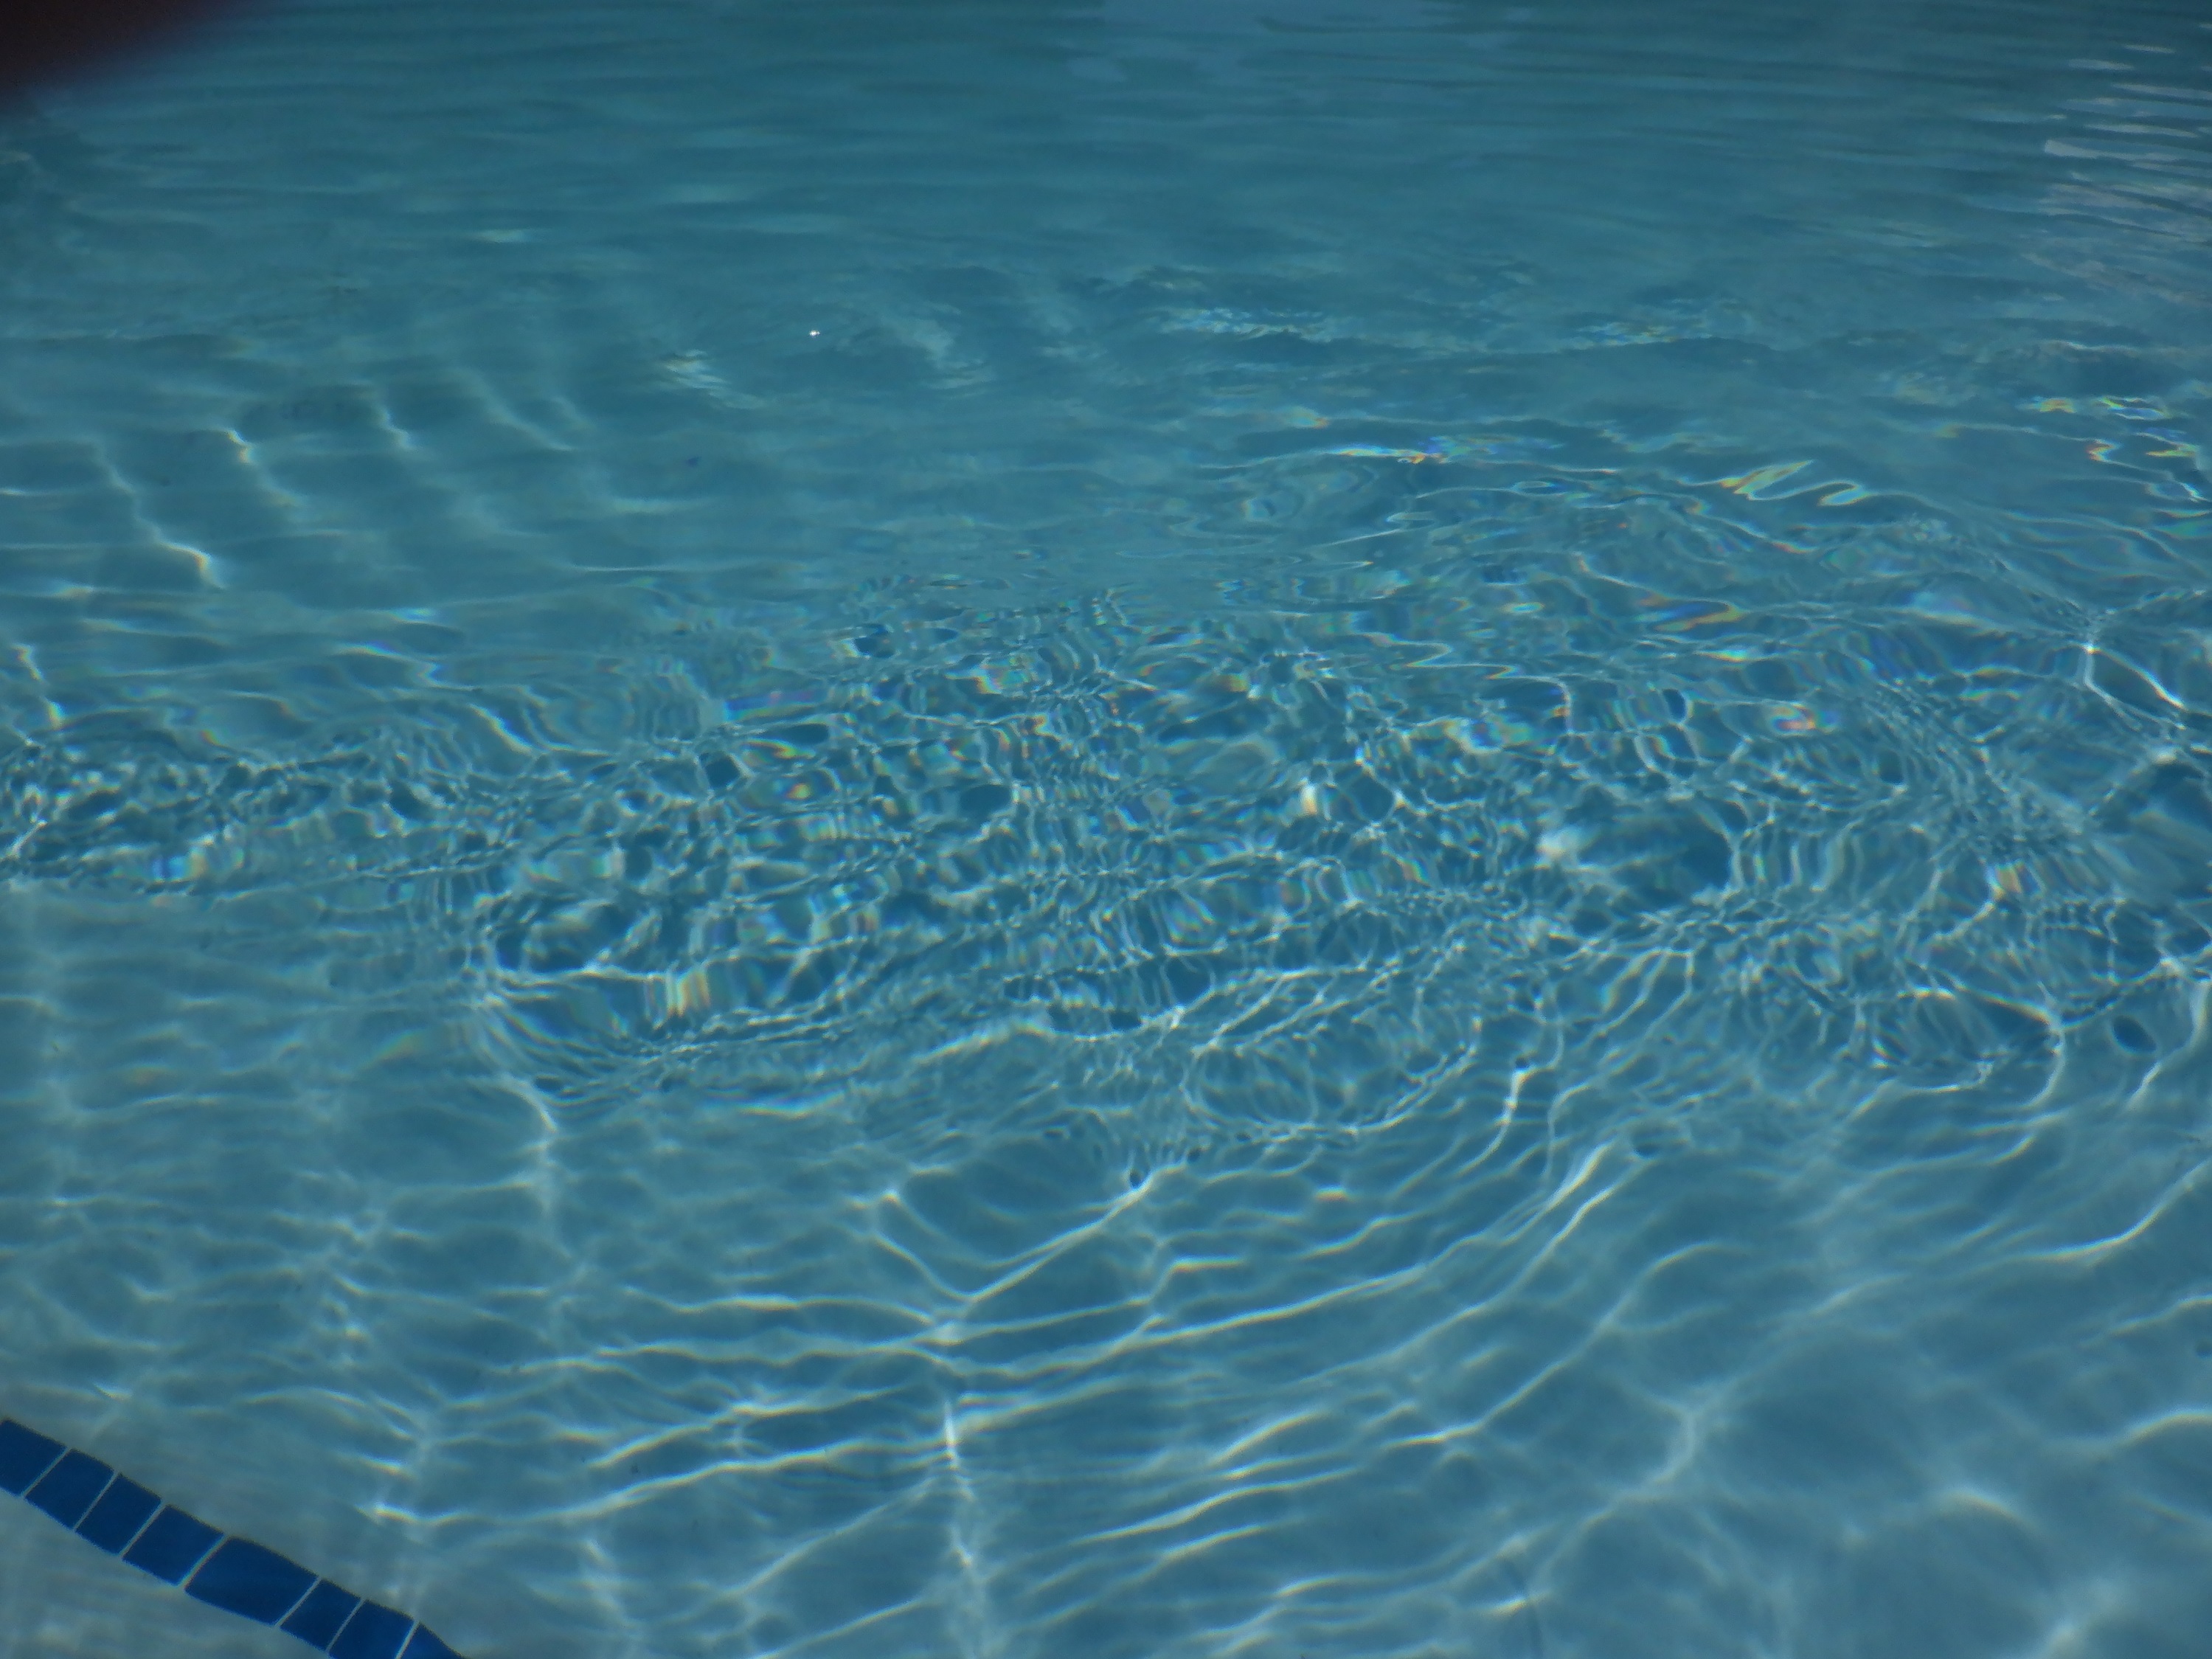 Photo I took at the pool today